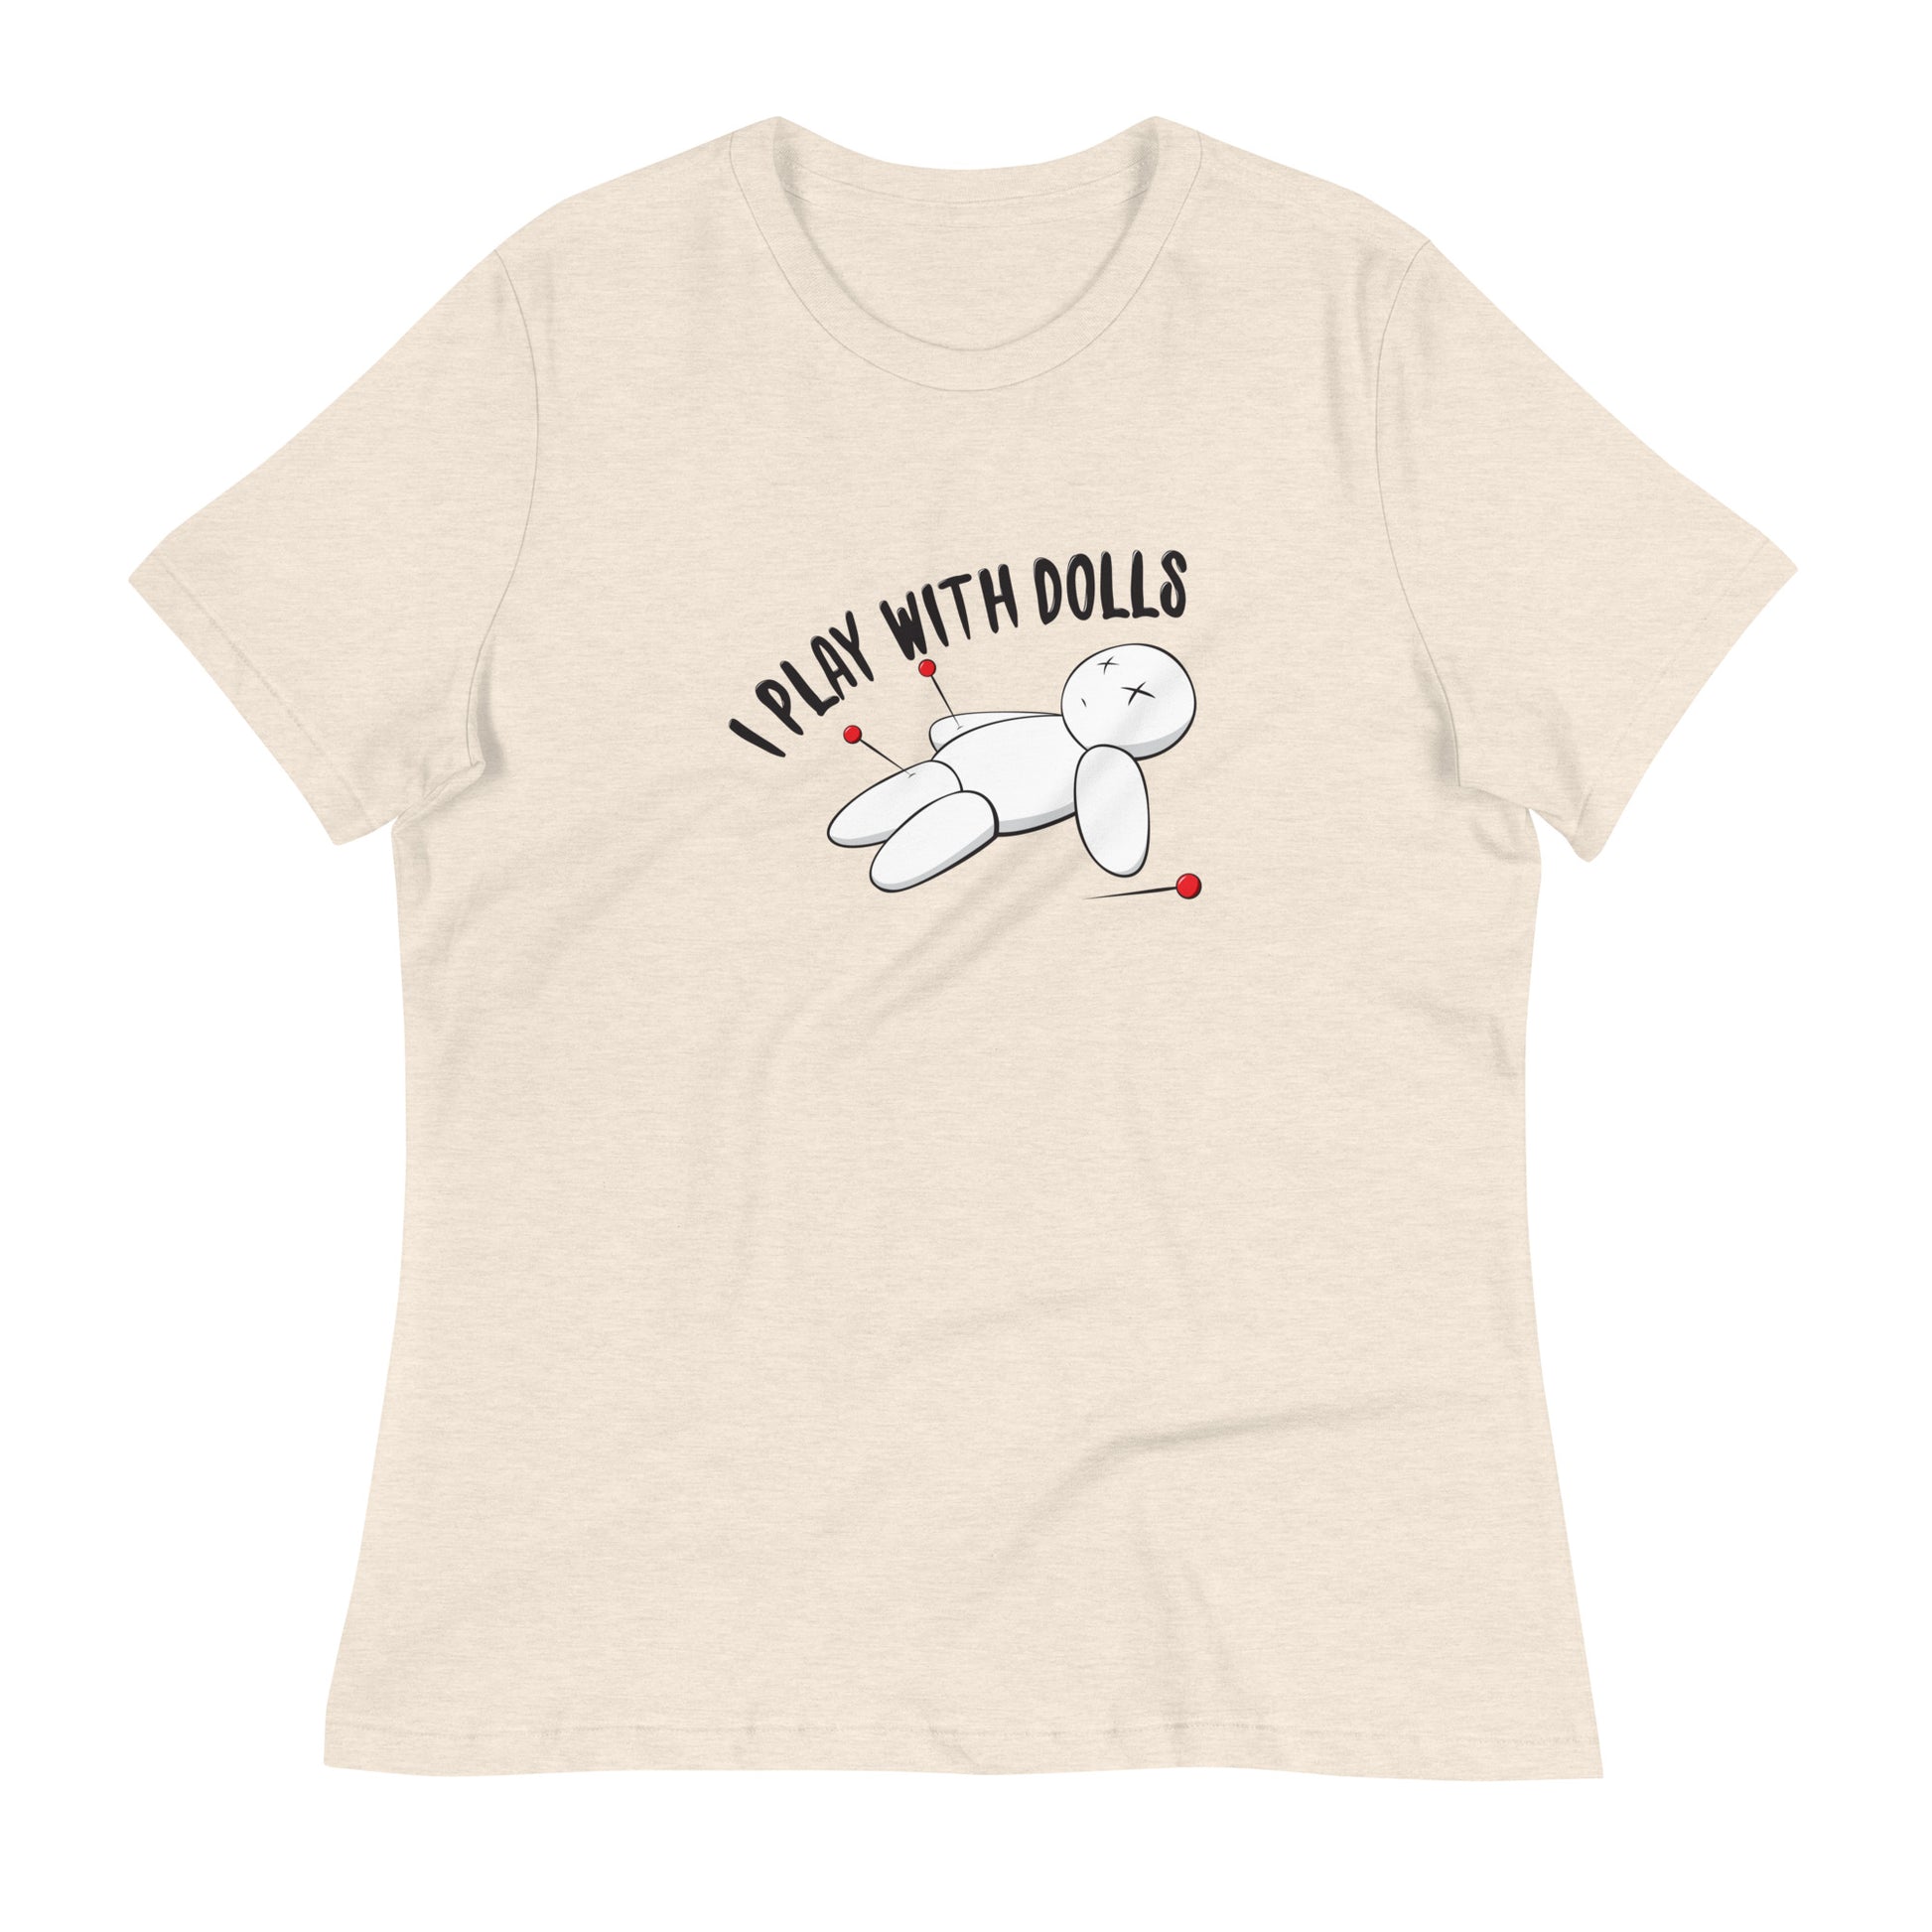 Heather Prism Natural (cream) women's relaxed fit t-shirt with graphic of white voodoo doll with Xs for eyes stuck with several pins and text "I PLAY WITH DOLLS"